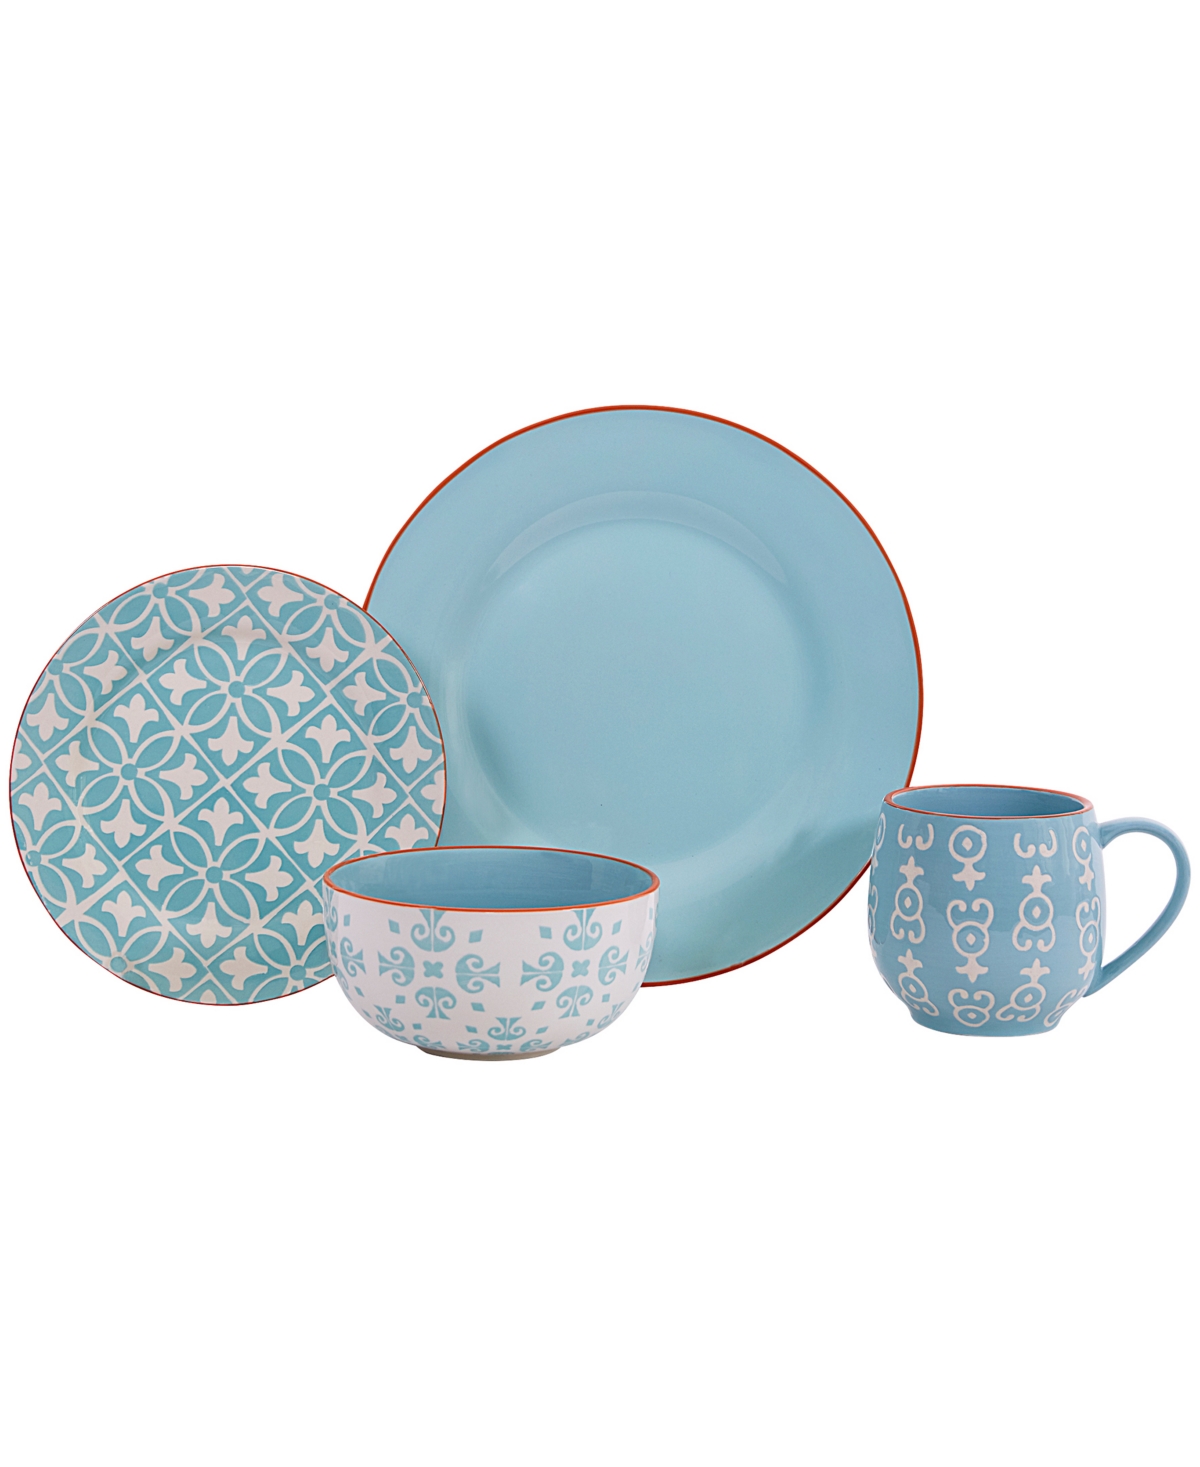 Geo Turquoise 16 Pc. Dinnerware Set, Service for 4 - Turquoise